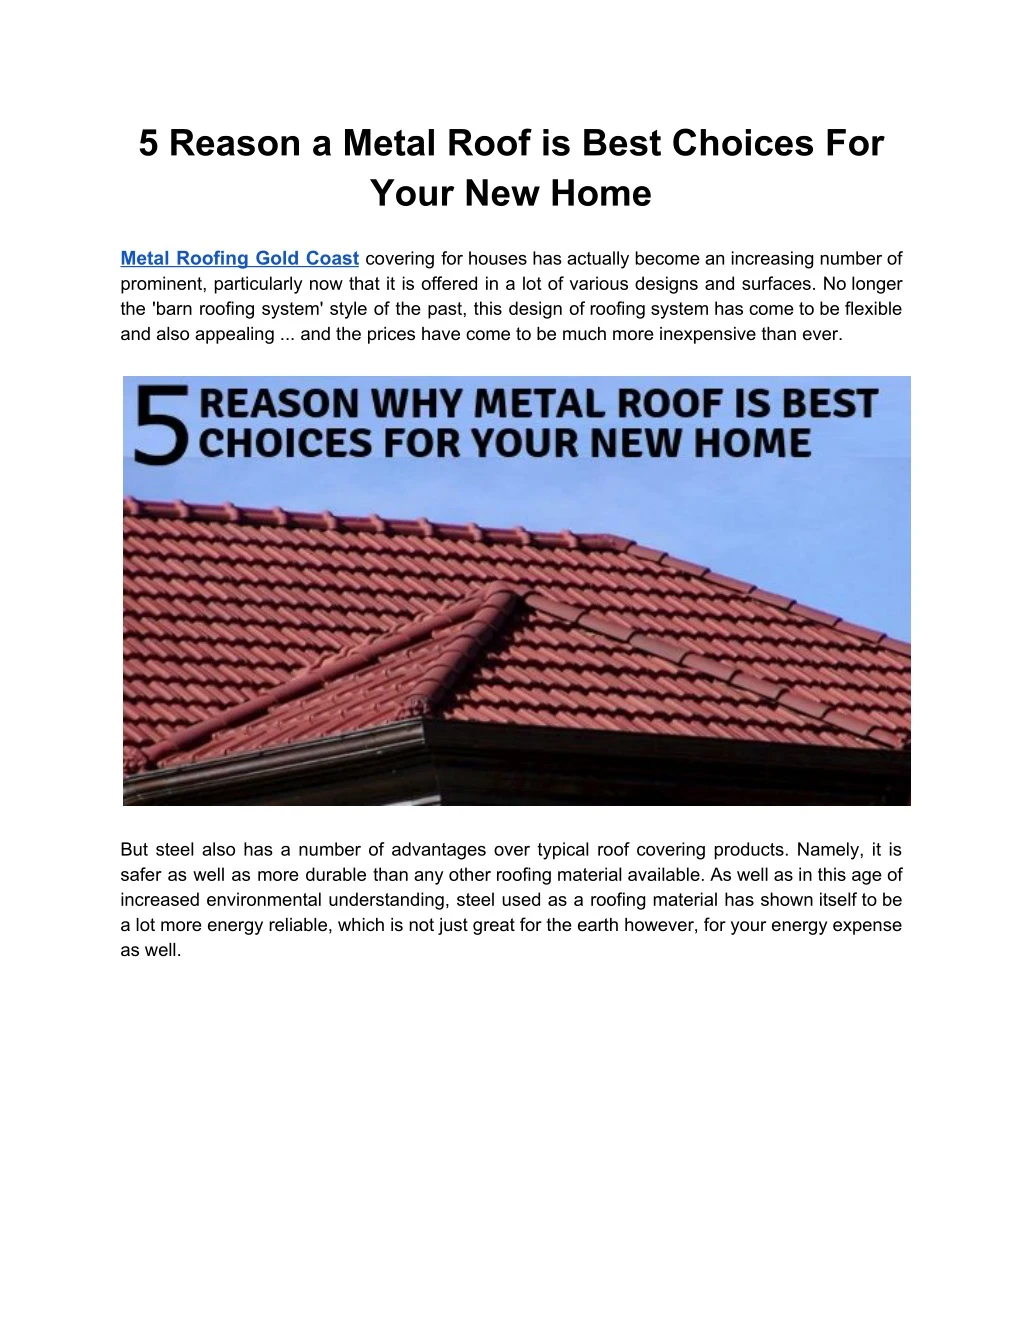 5 reason a metal roof is best choices for your